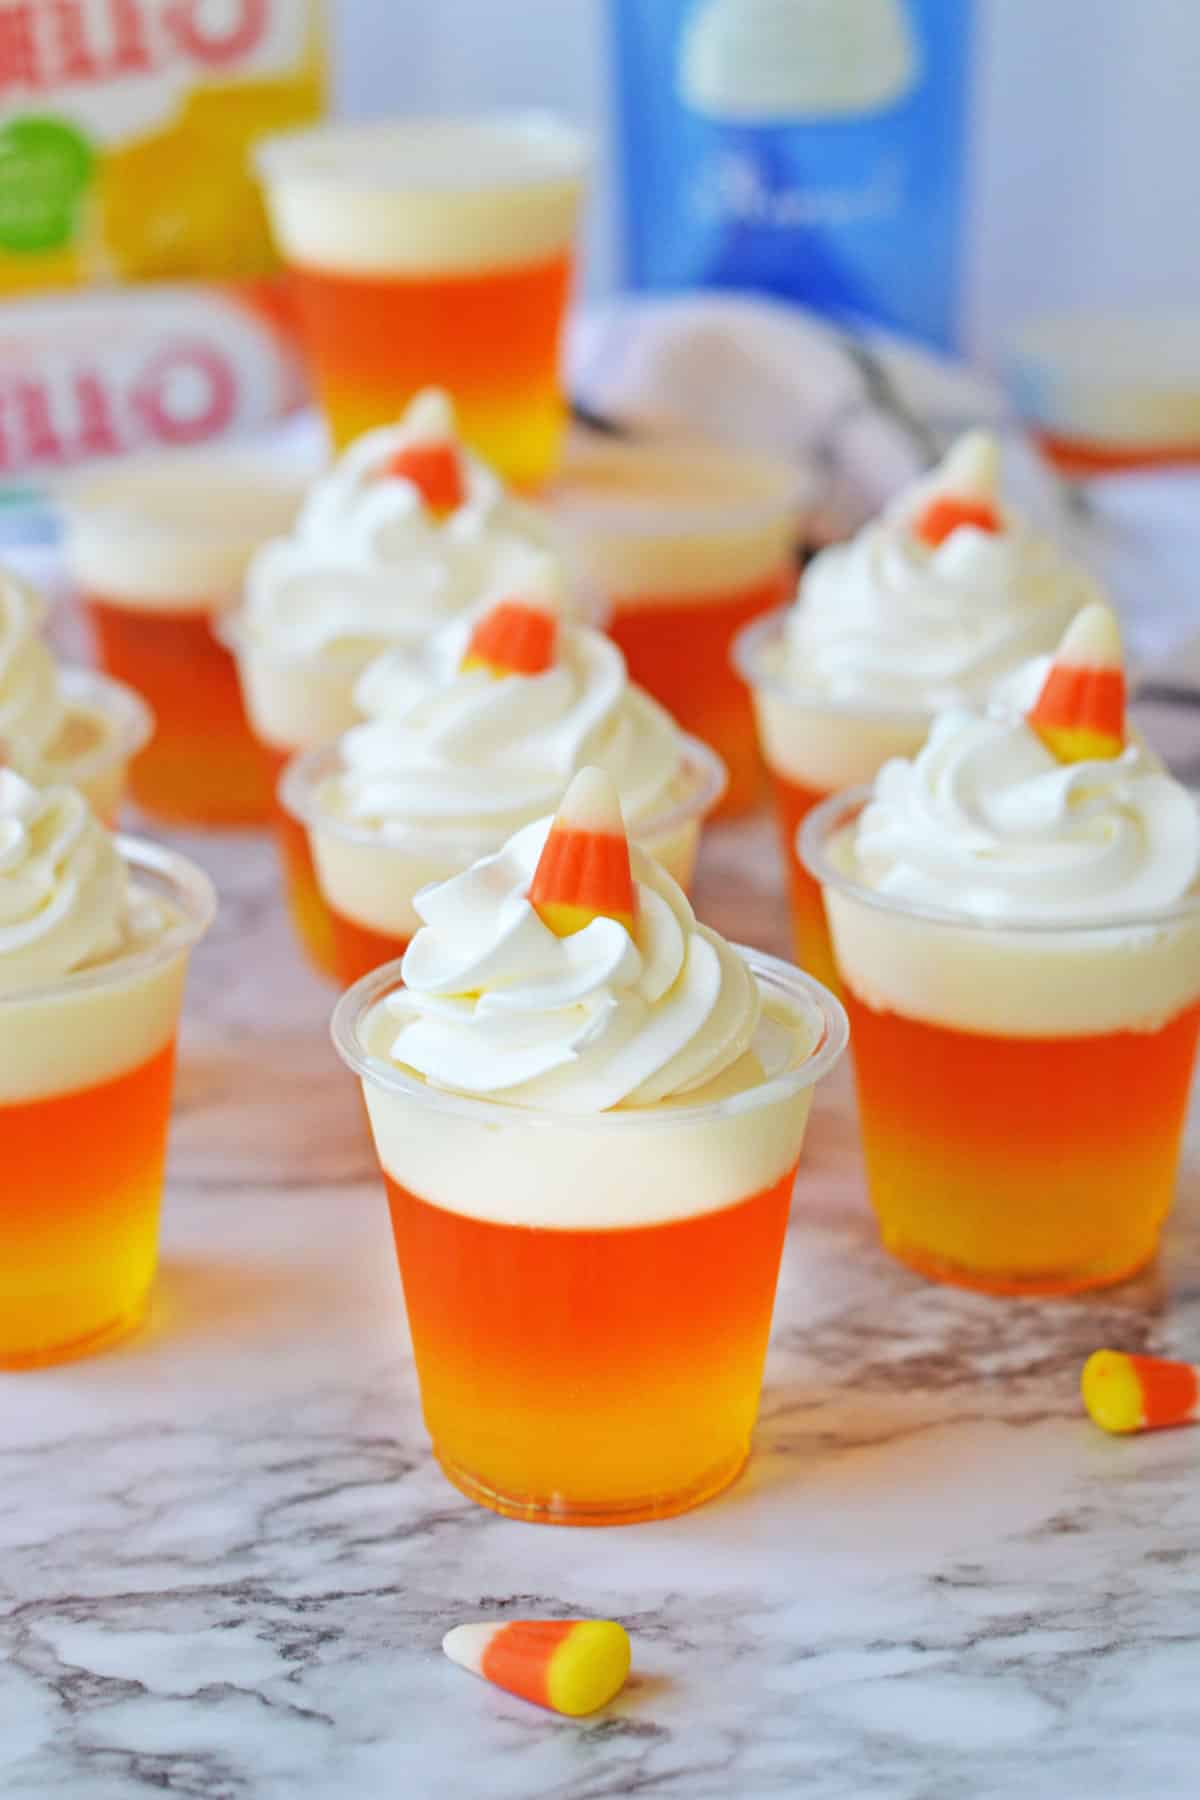 Candy corn jello shots on a marble counter